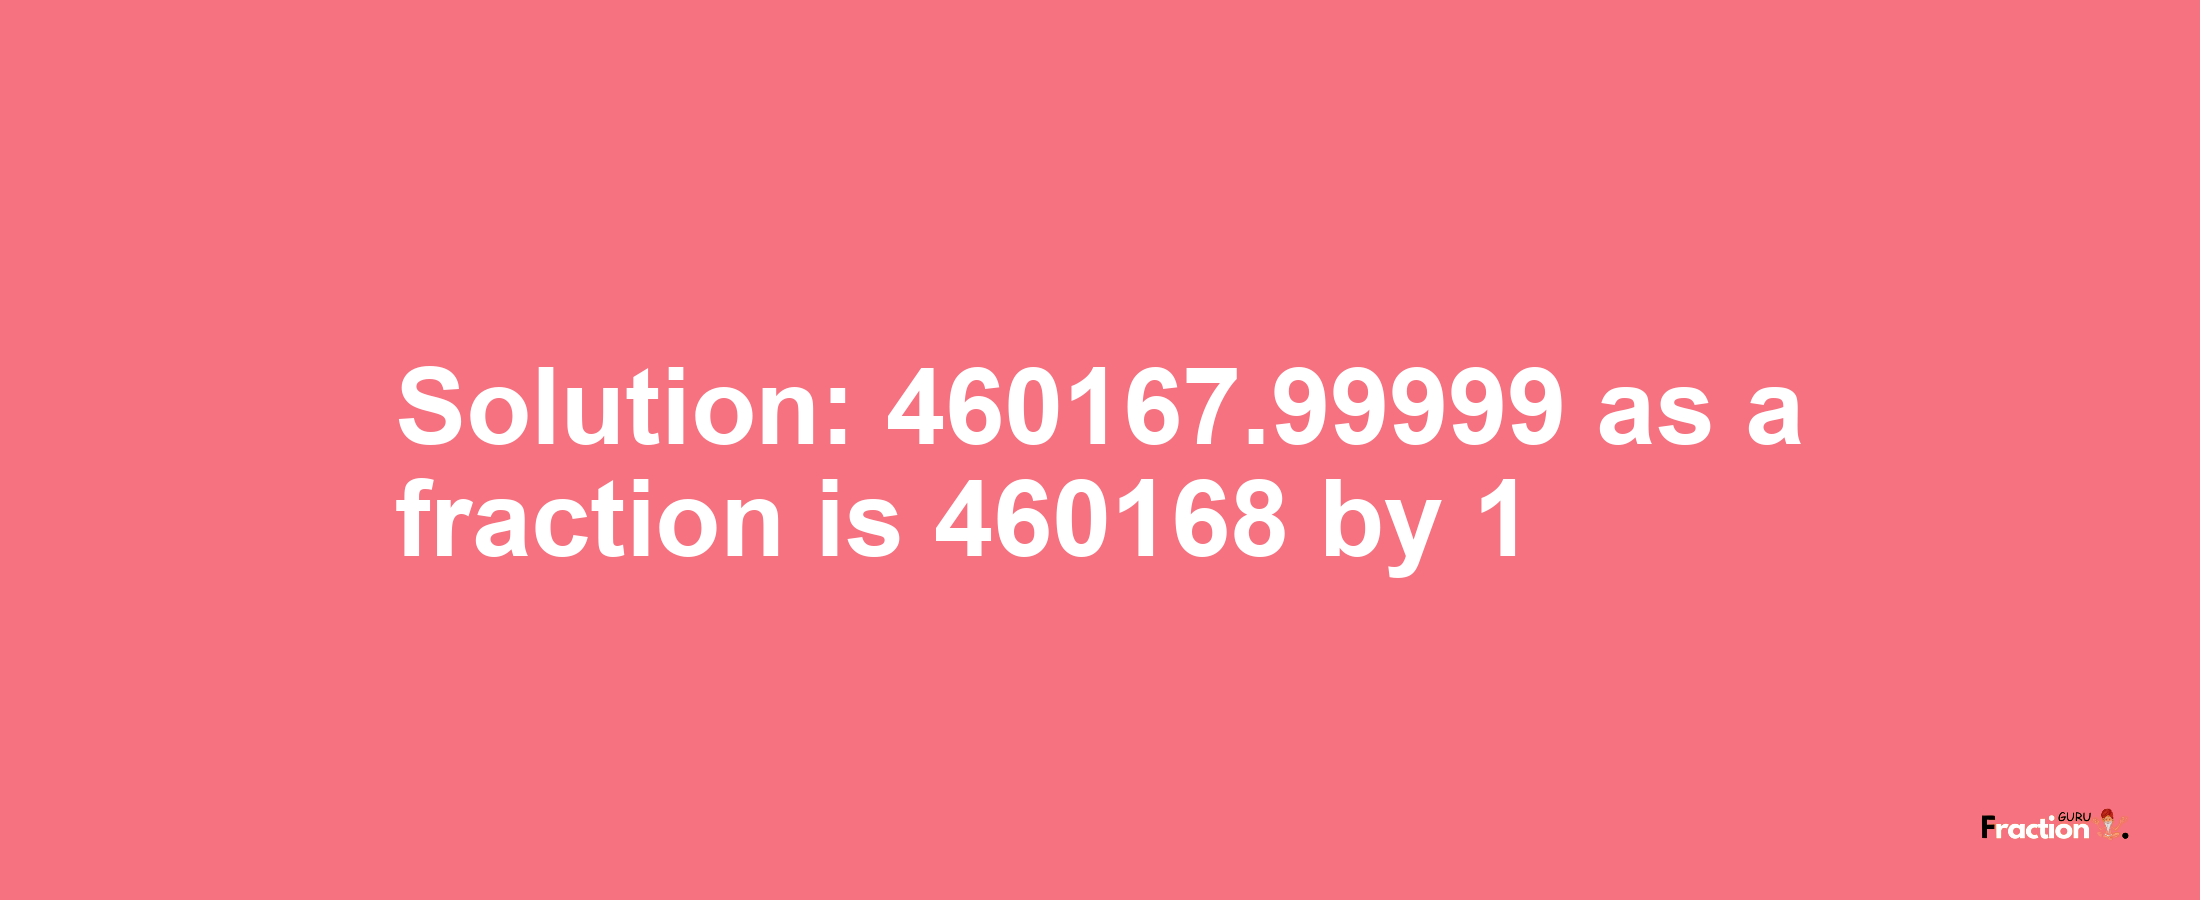 Solution:460167.99999 as a fraction is 460168/1